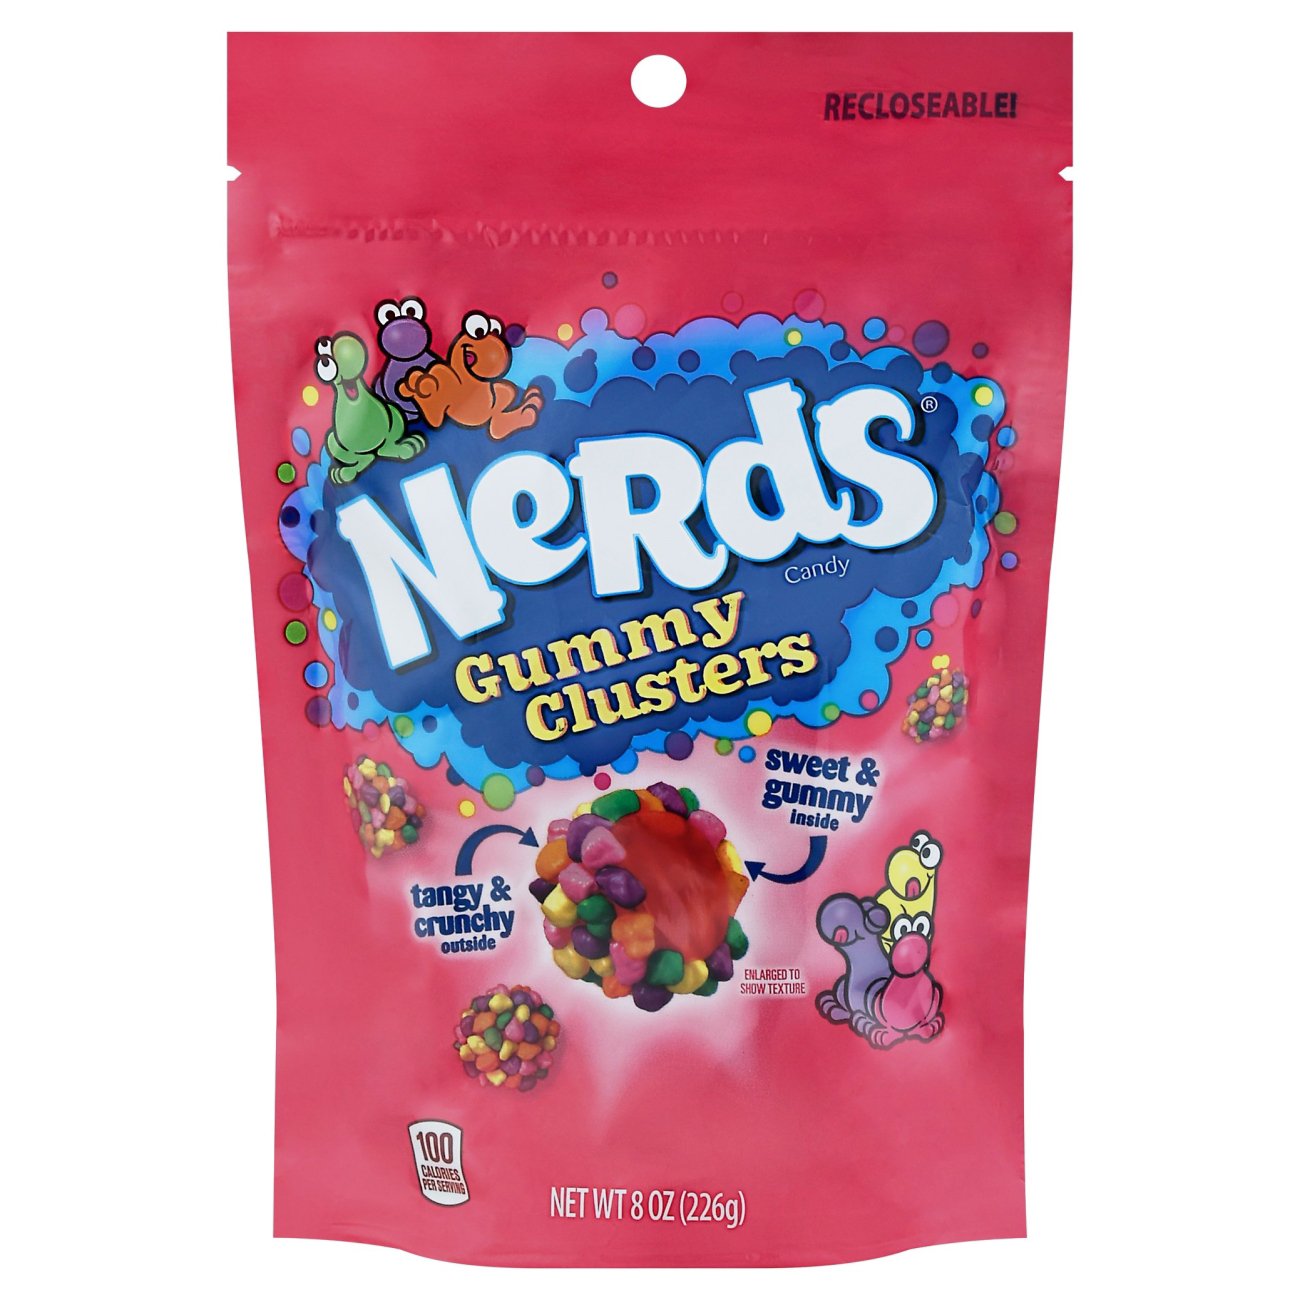 Nerds Gummy Clusters Candy - Shop Candy at H-E-B